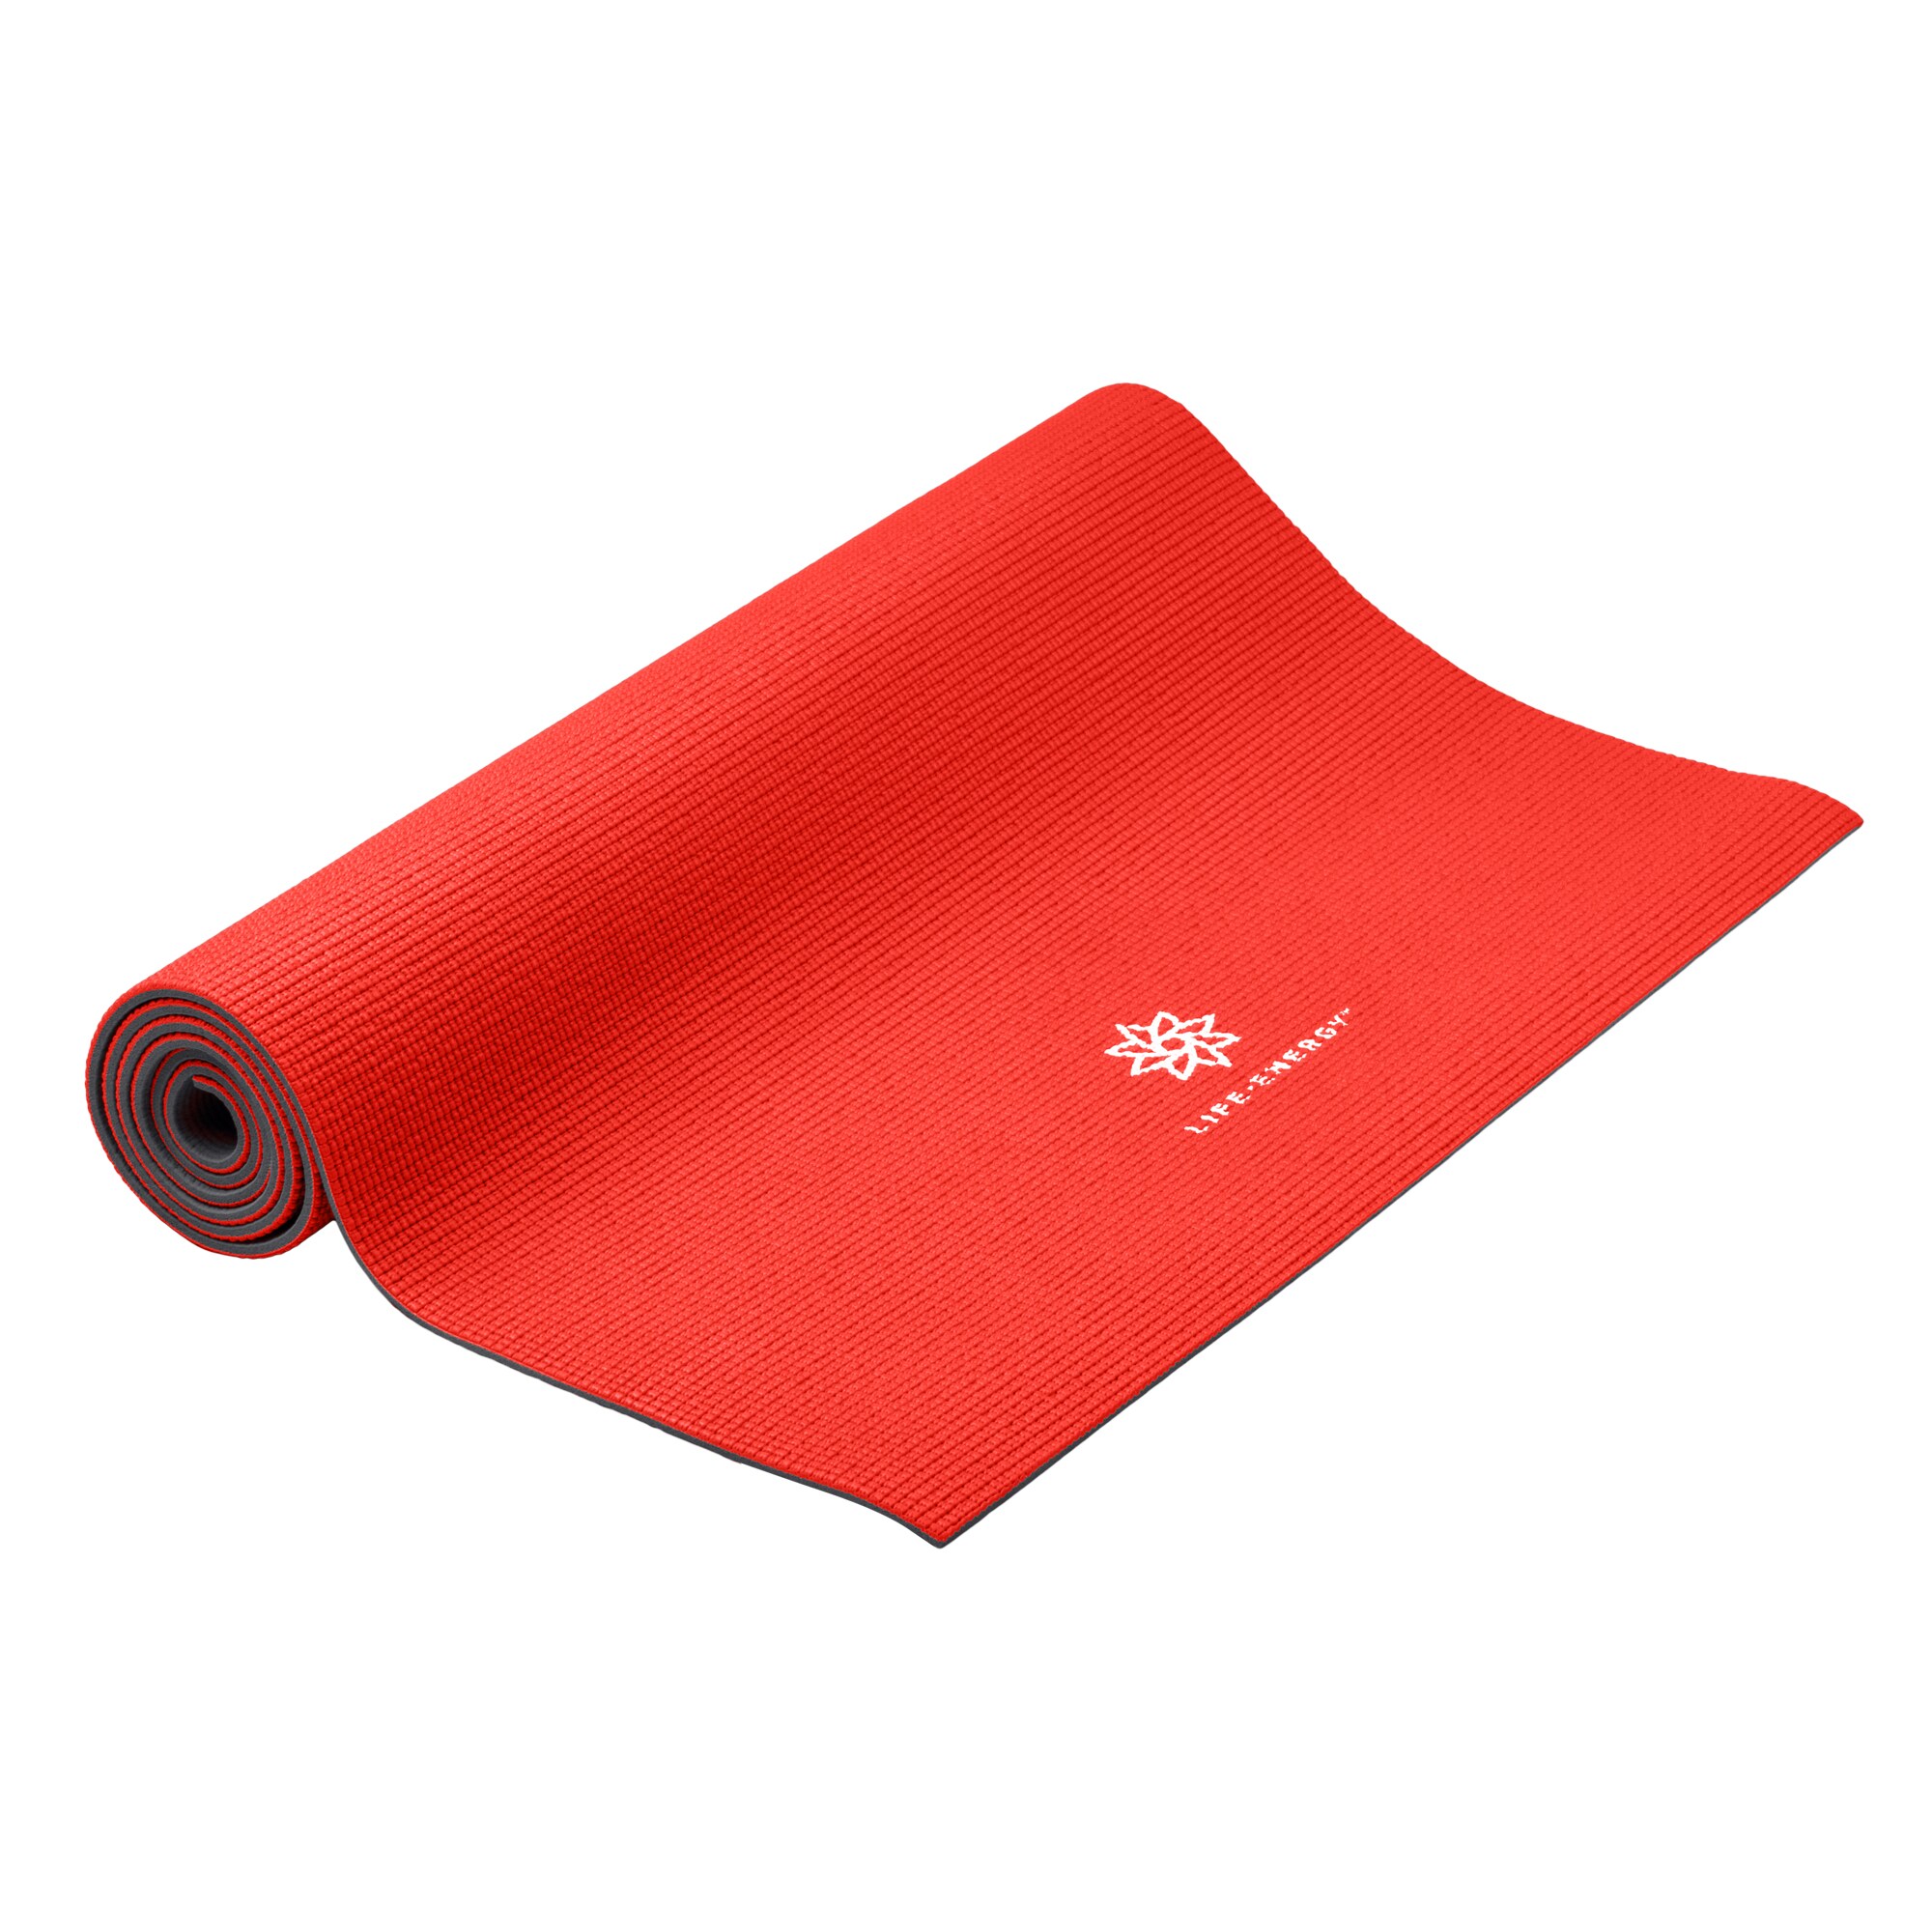 Life Energy Reversible Milli-m-mm Antimicrobial Yoga Mat With